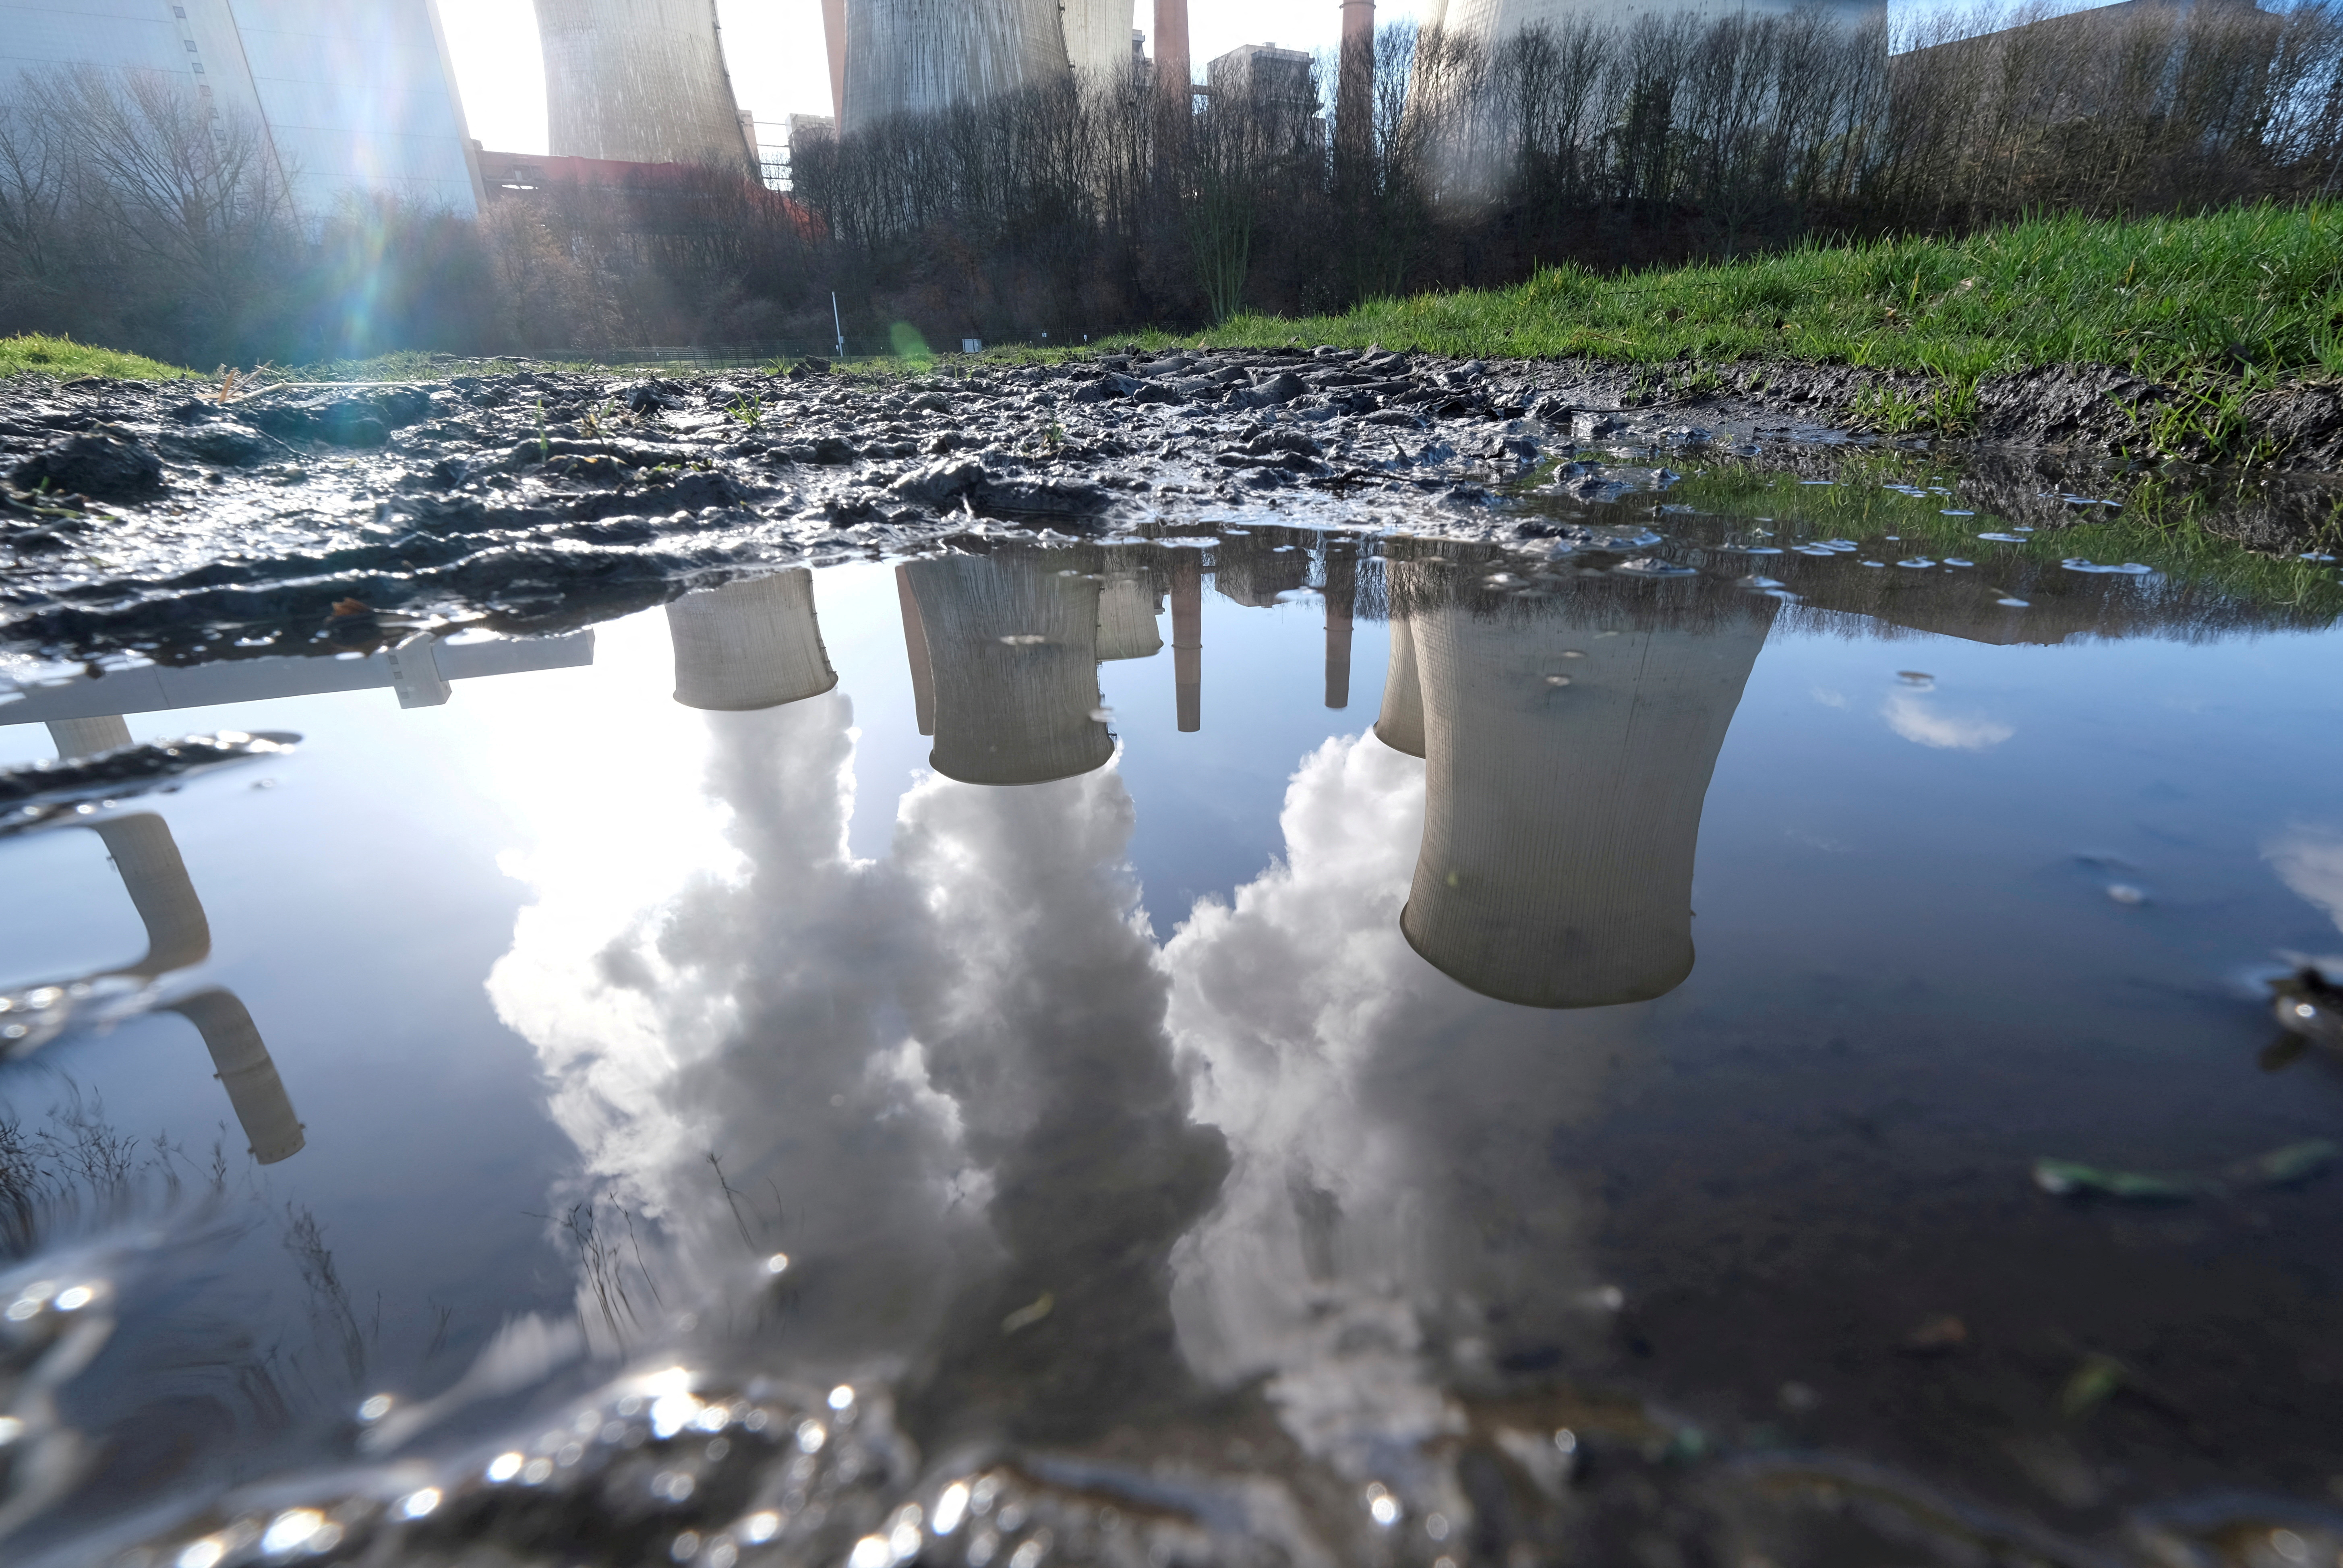 The lignite (brown coal) power plant complex of German energy supplier and utility RWE is reflected in a puddle in Neurath